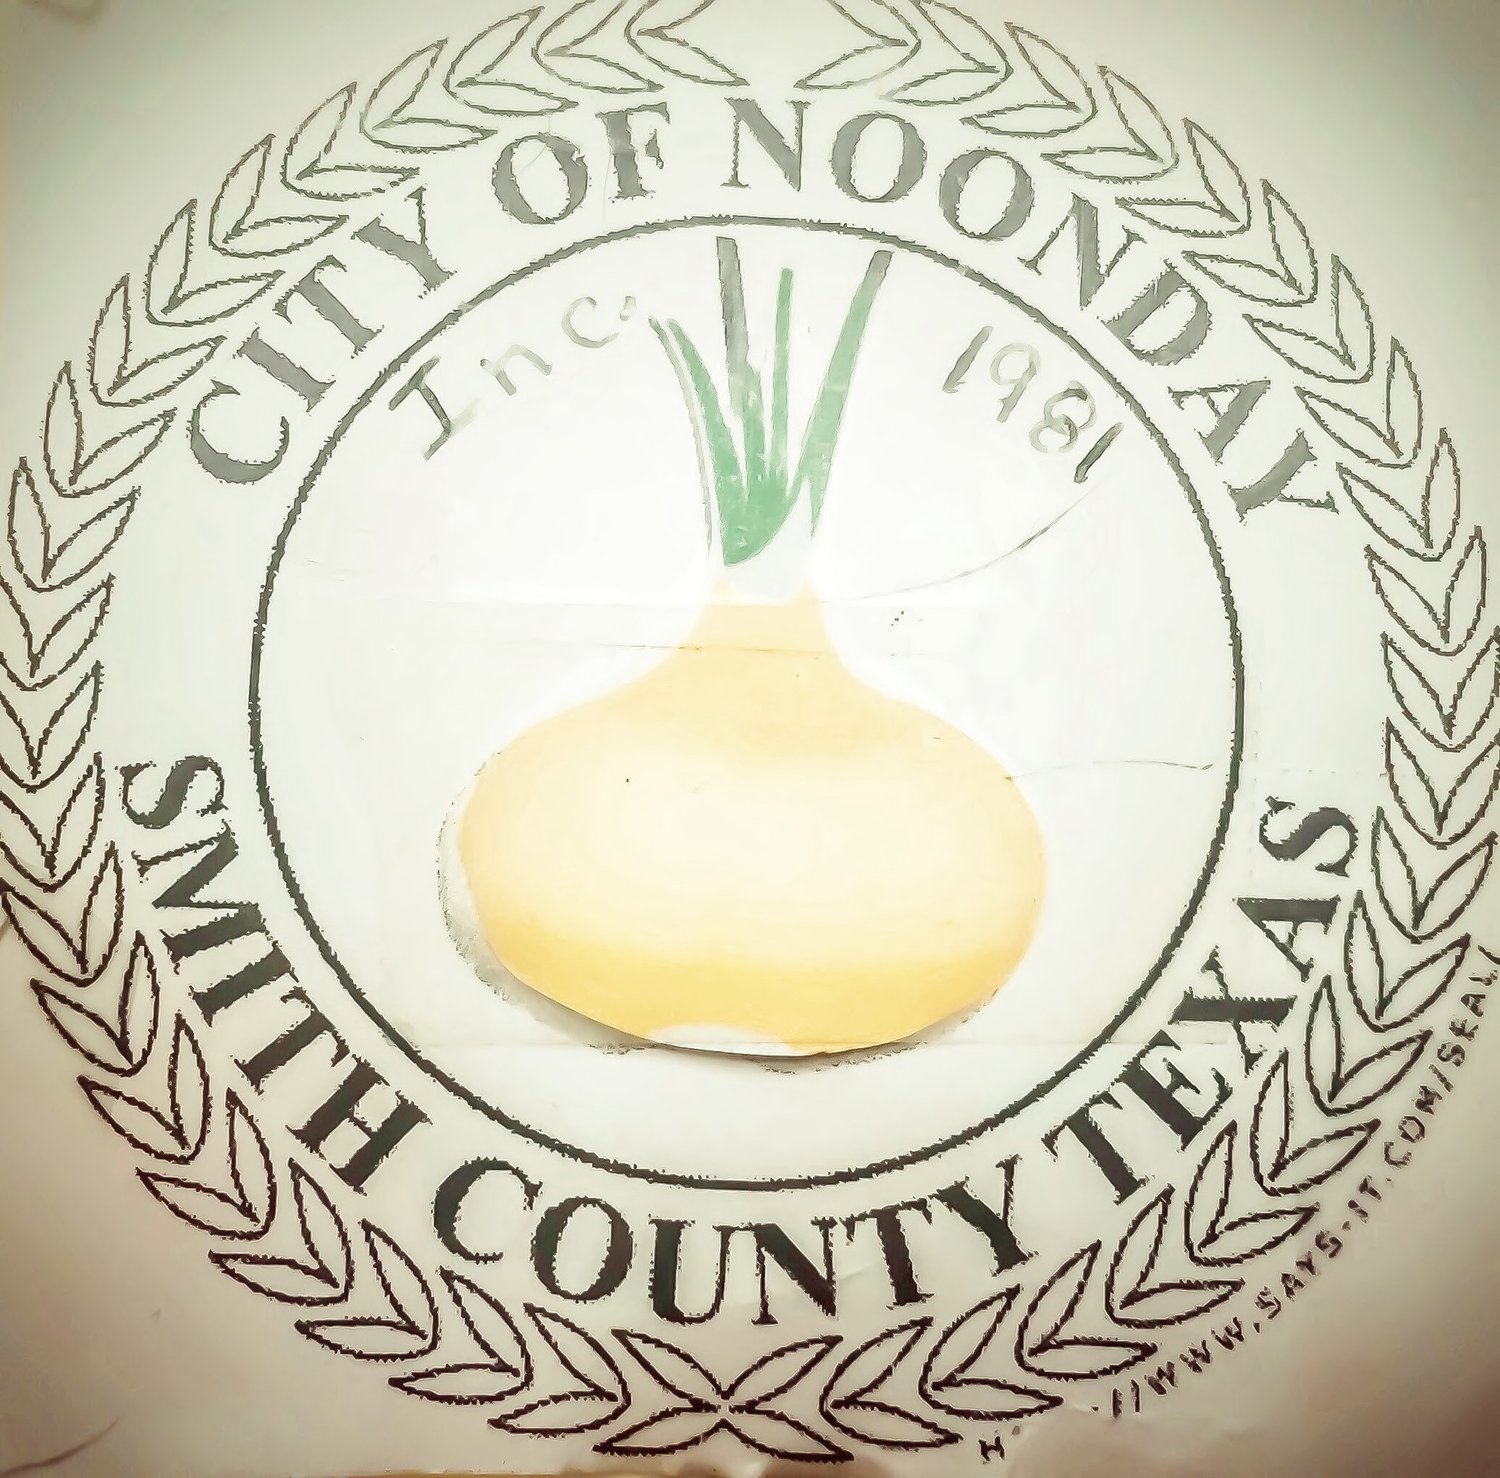 City of Noonday